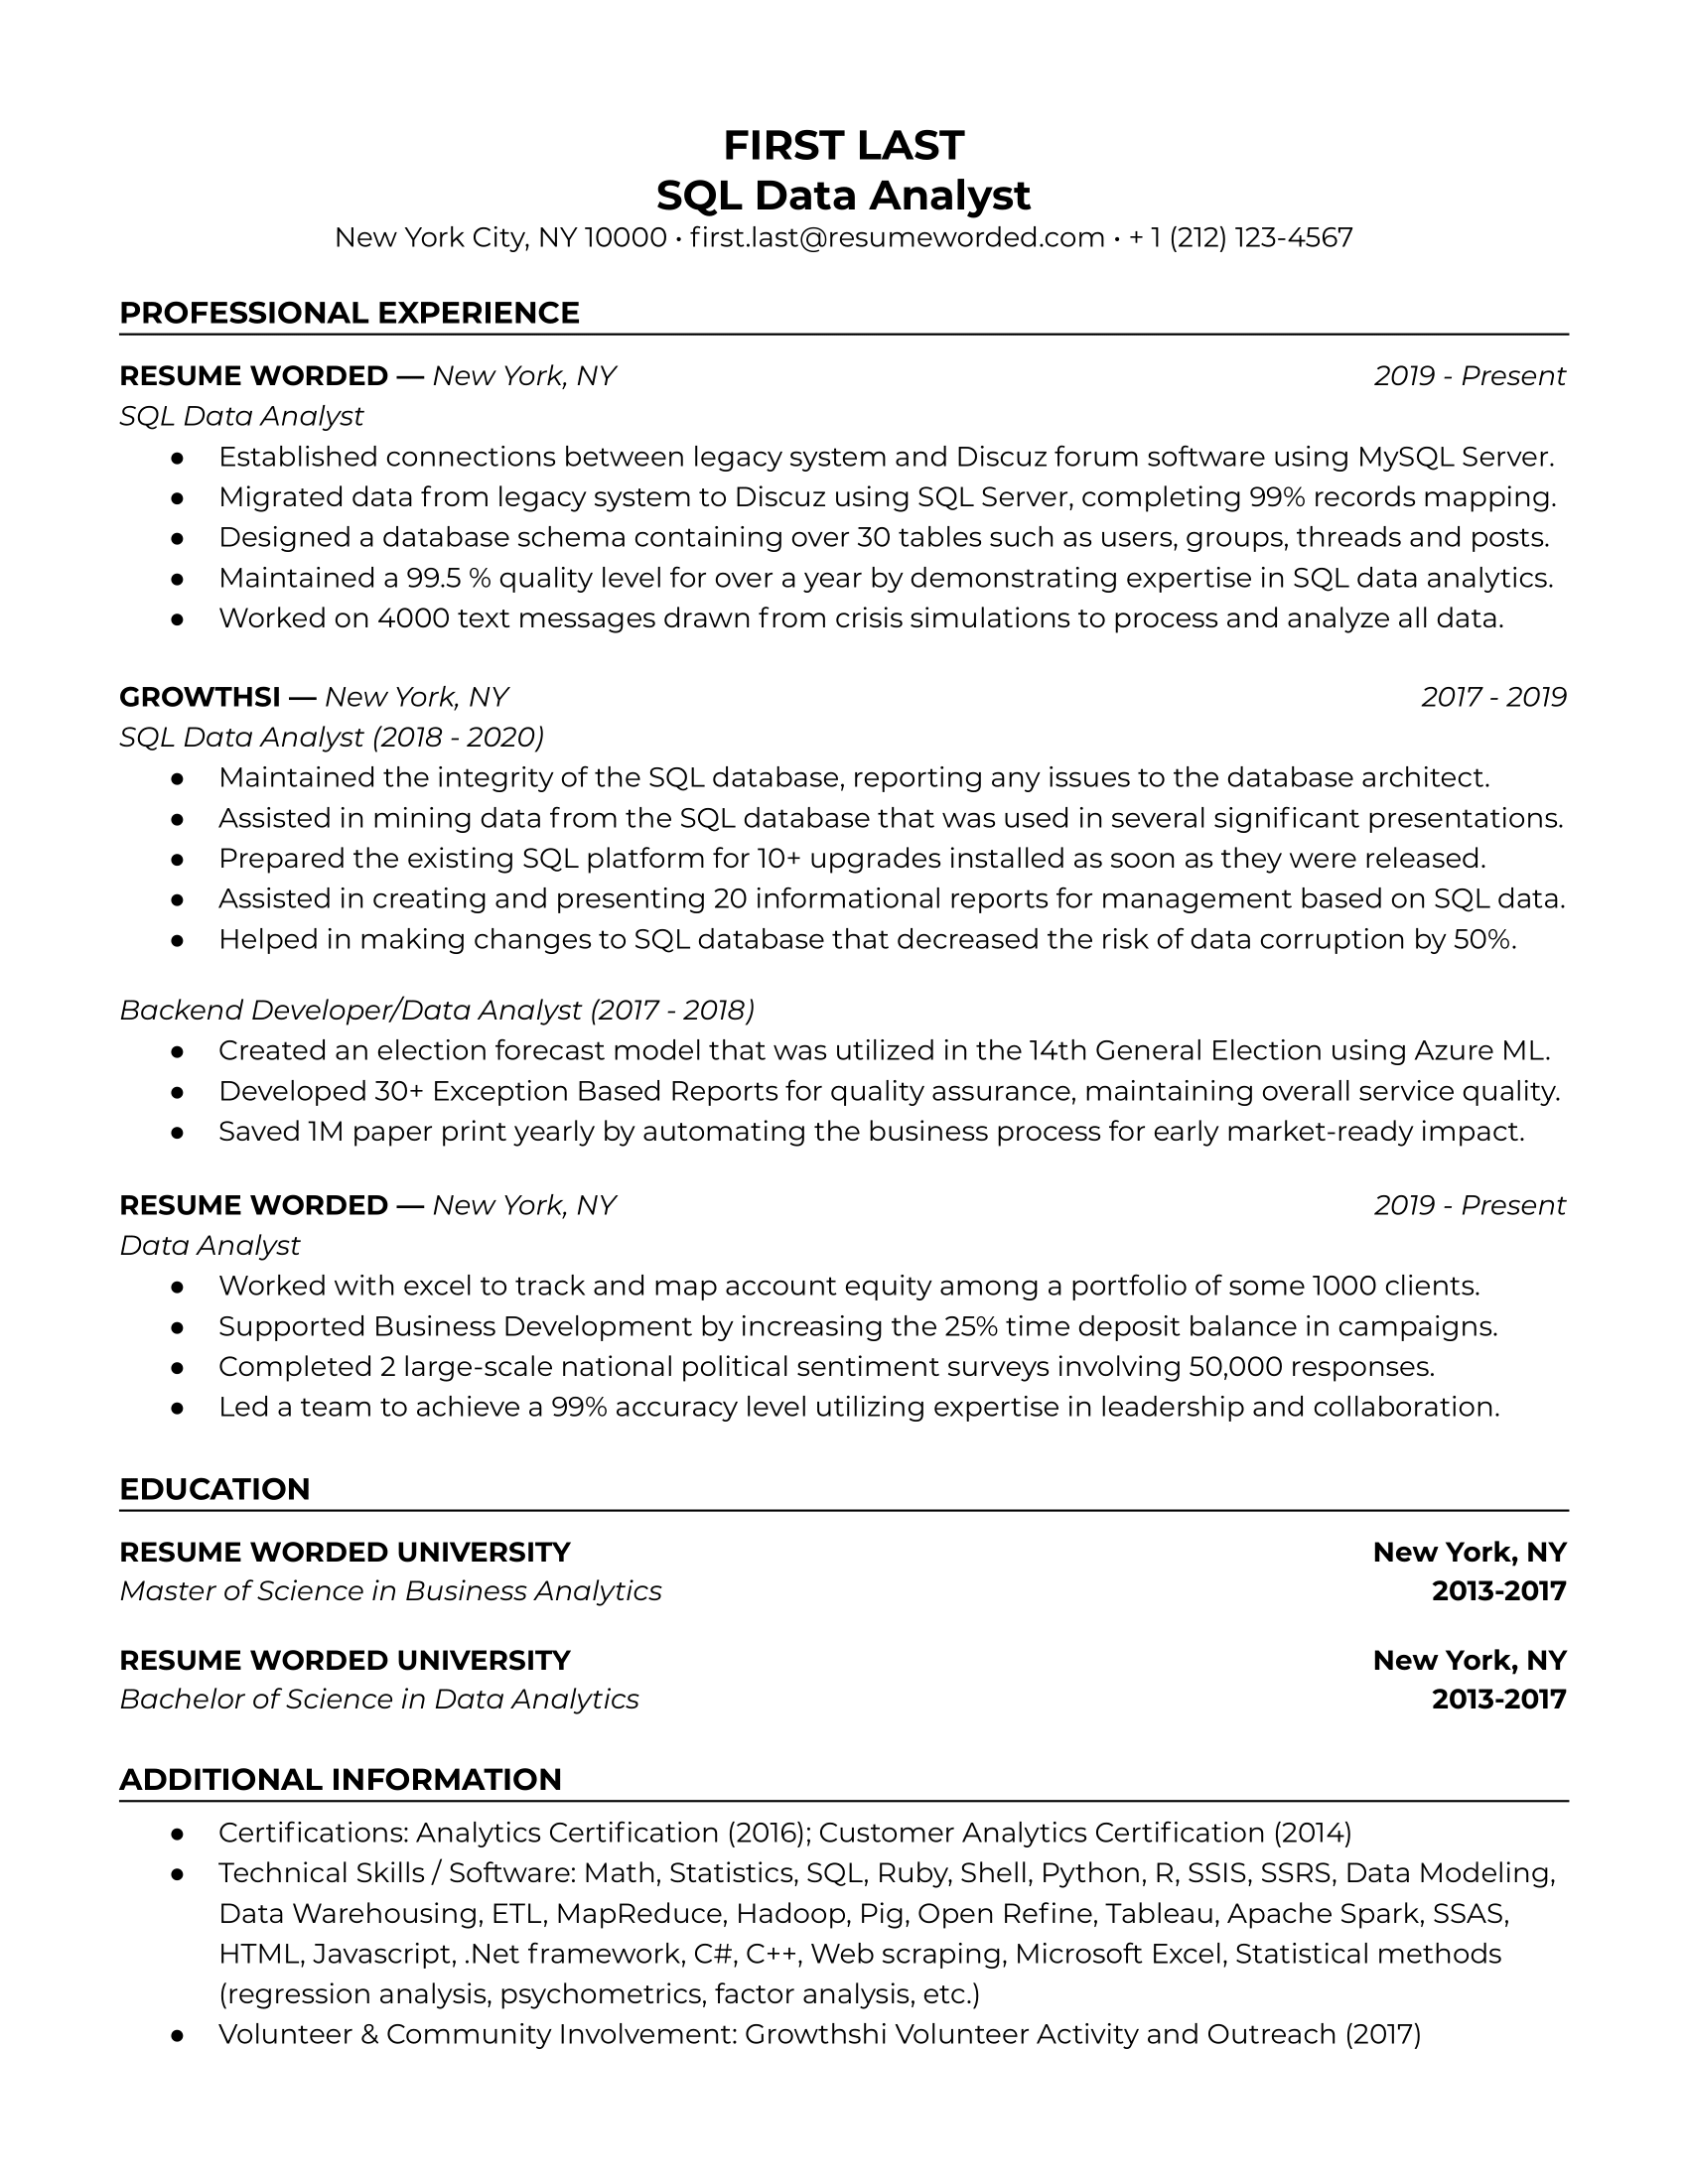 SQL Data Analyst Resume Template + Example